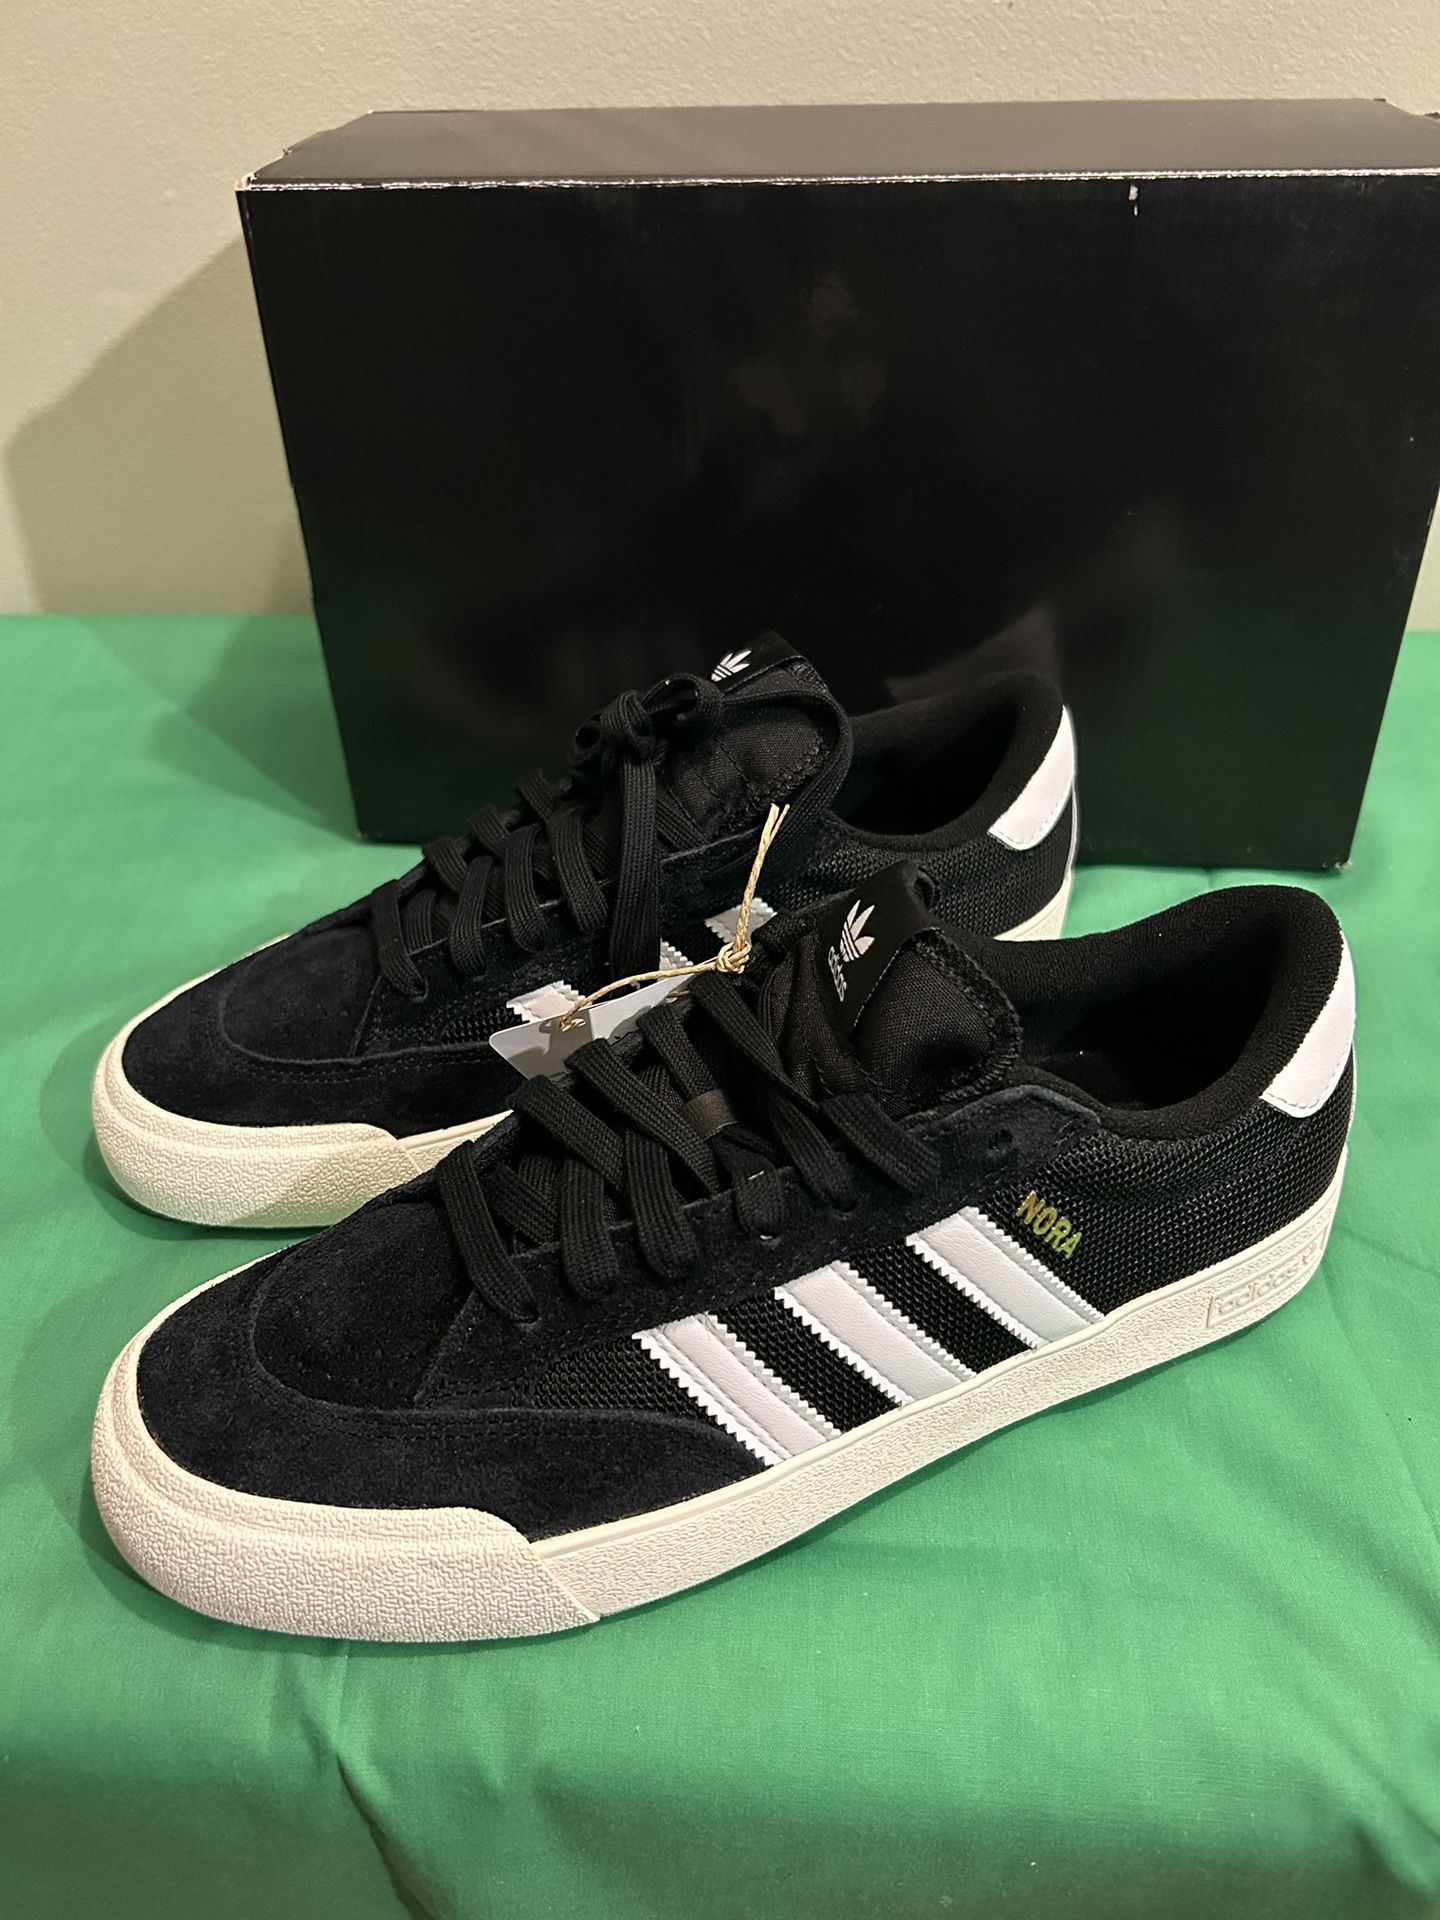 New Adidas Originals Sneakers NORA Skateboard Skate Shoes GV6777 SIZE-11.5 MENS for Sale in Jessup, MD - OfferUp